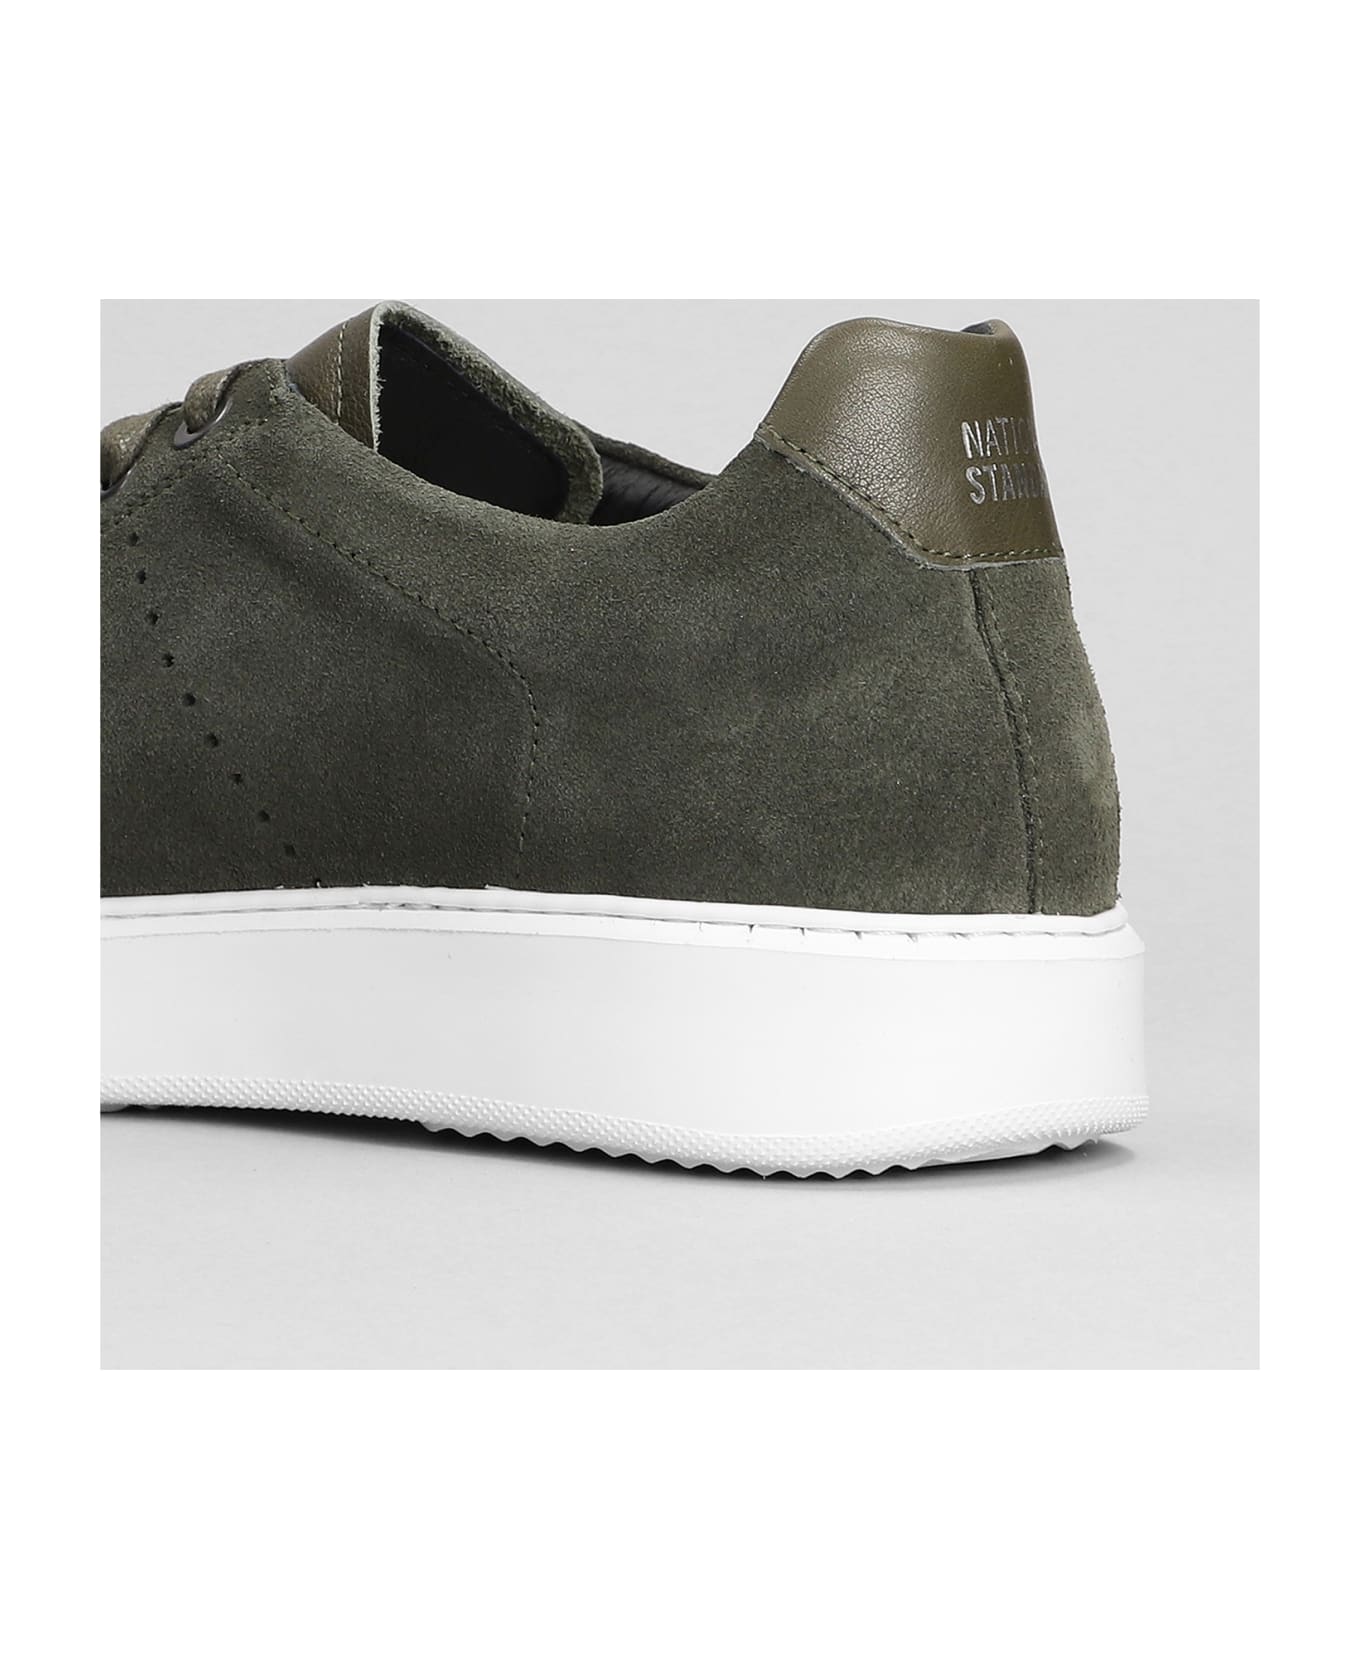 National Standard Edition 9 Sneakers In Khaki Suede - khaki